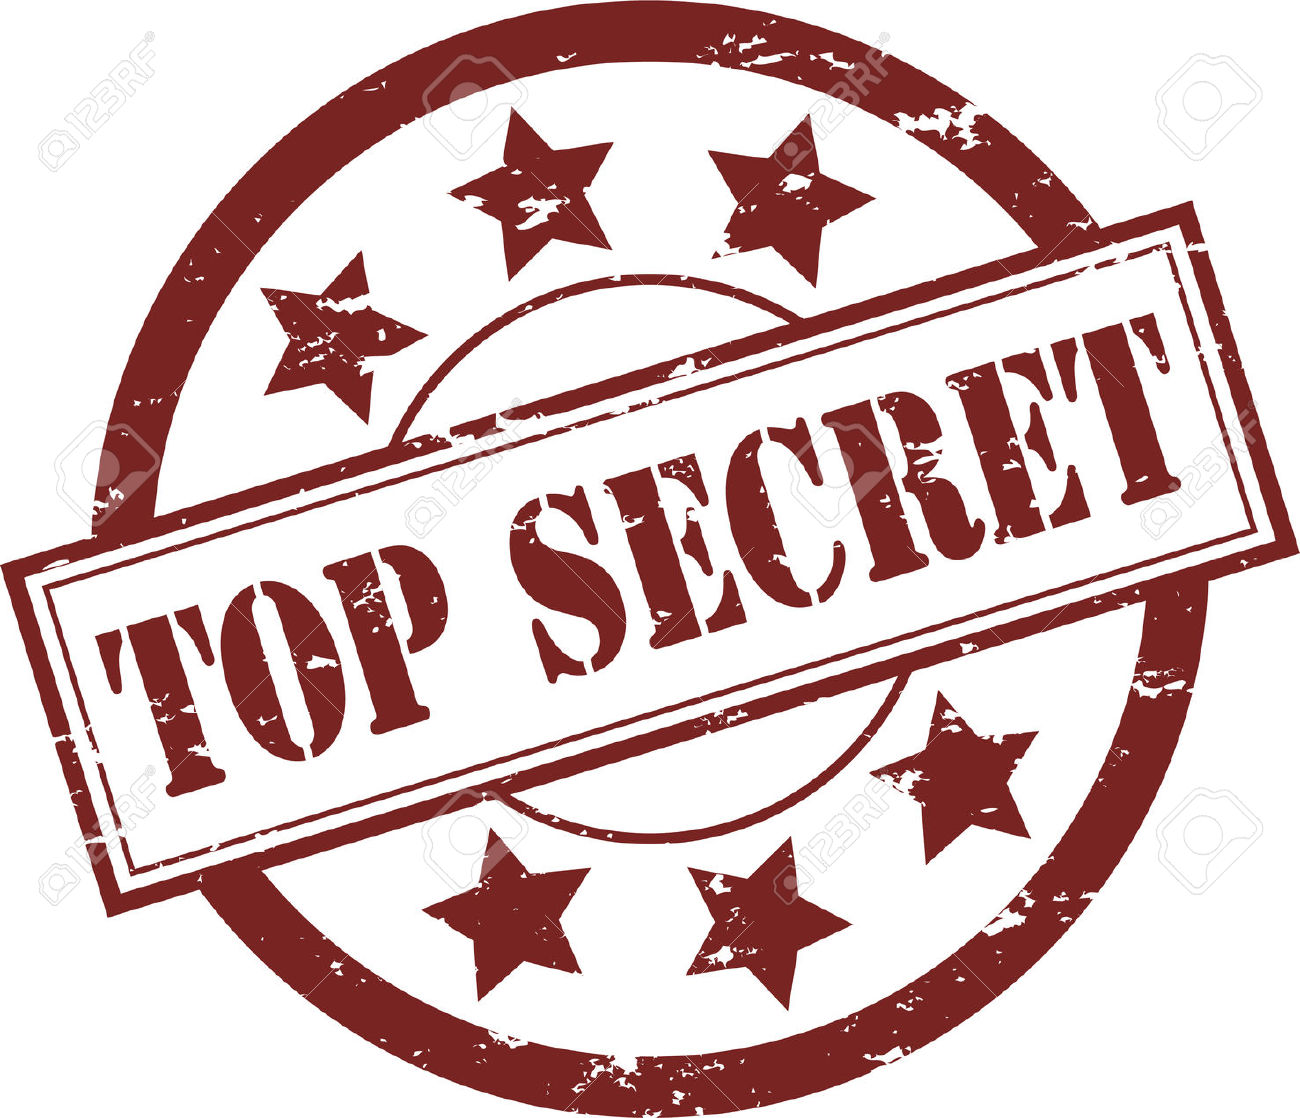 Related Pictures Top Secret C